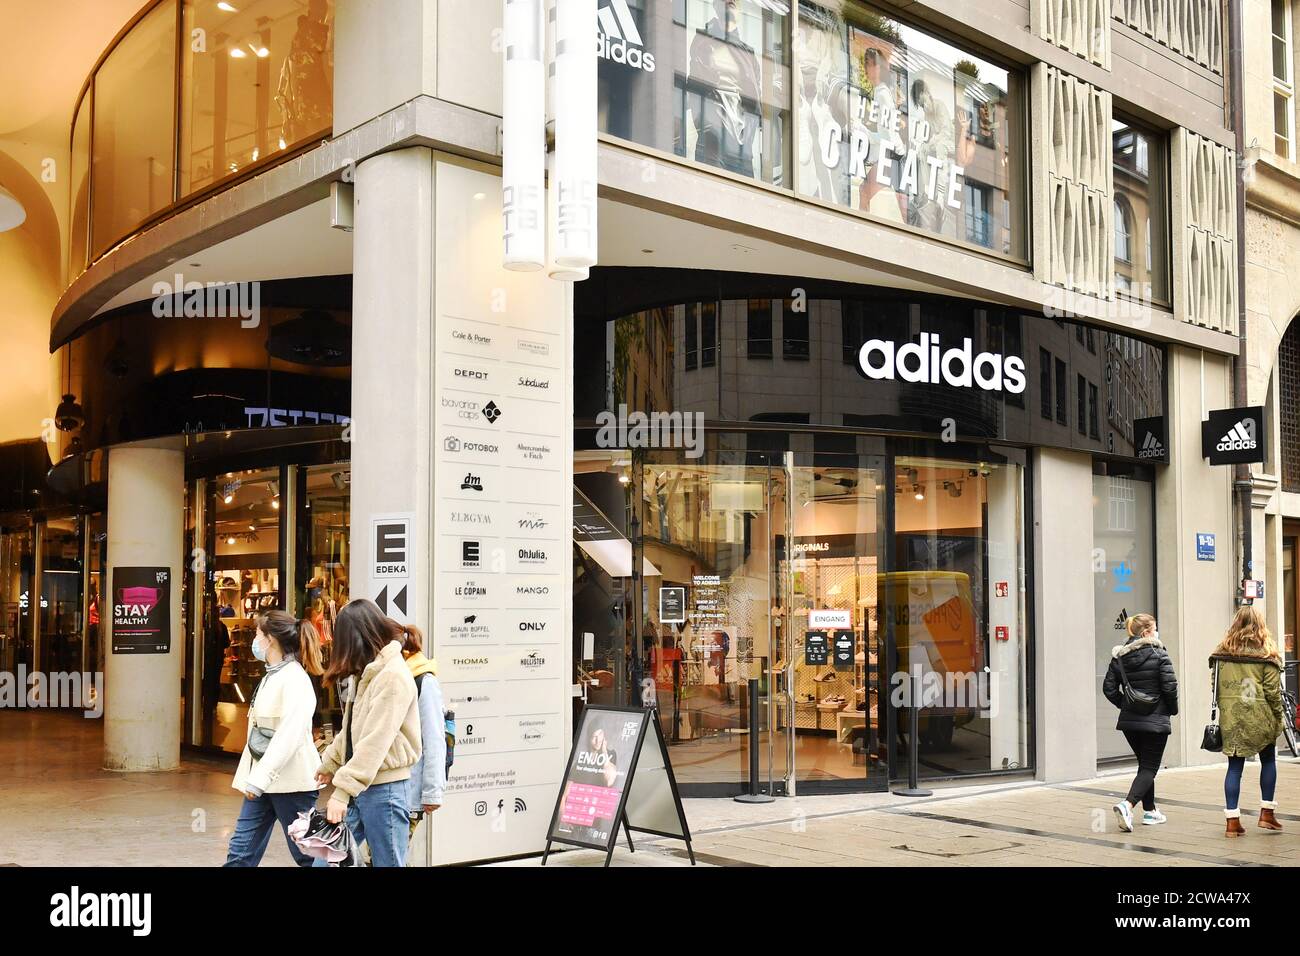 Al aire libre Cita revolución Exterior view of an adidas store, flagship store in Sendlinger Strasse in  Muenchen, sporting goods manufacturer, | usage worldwide Stock Photo - Alamy